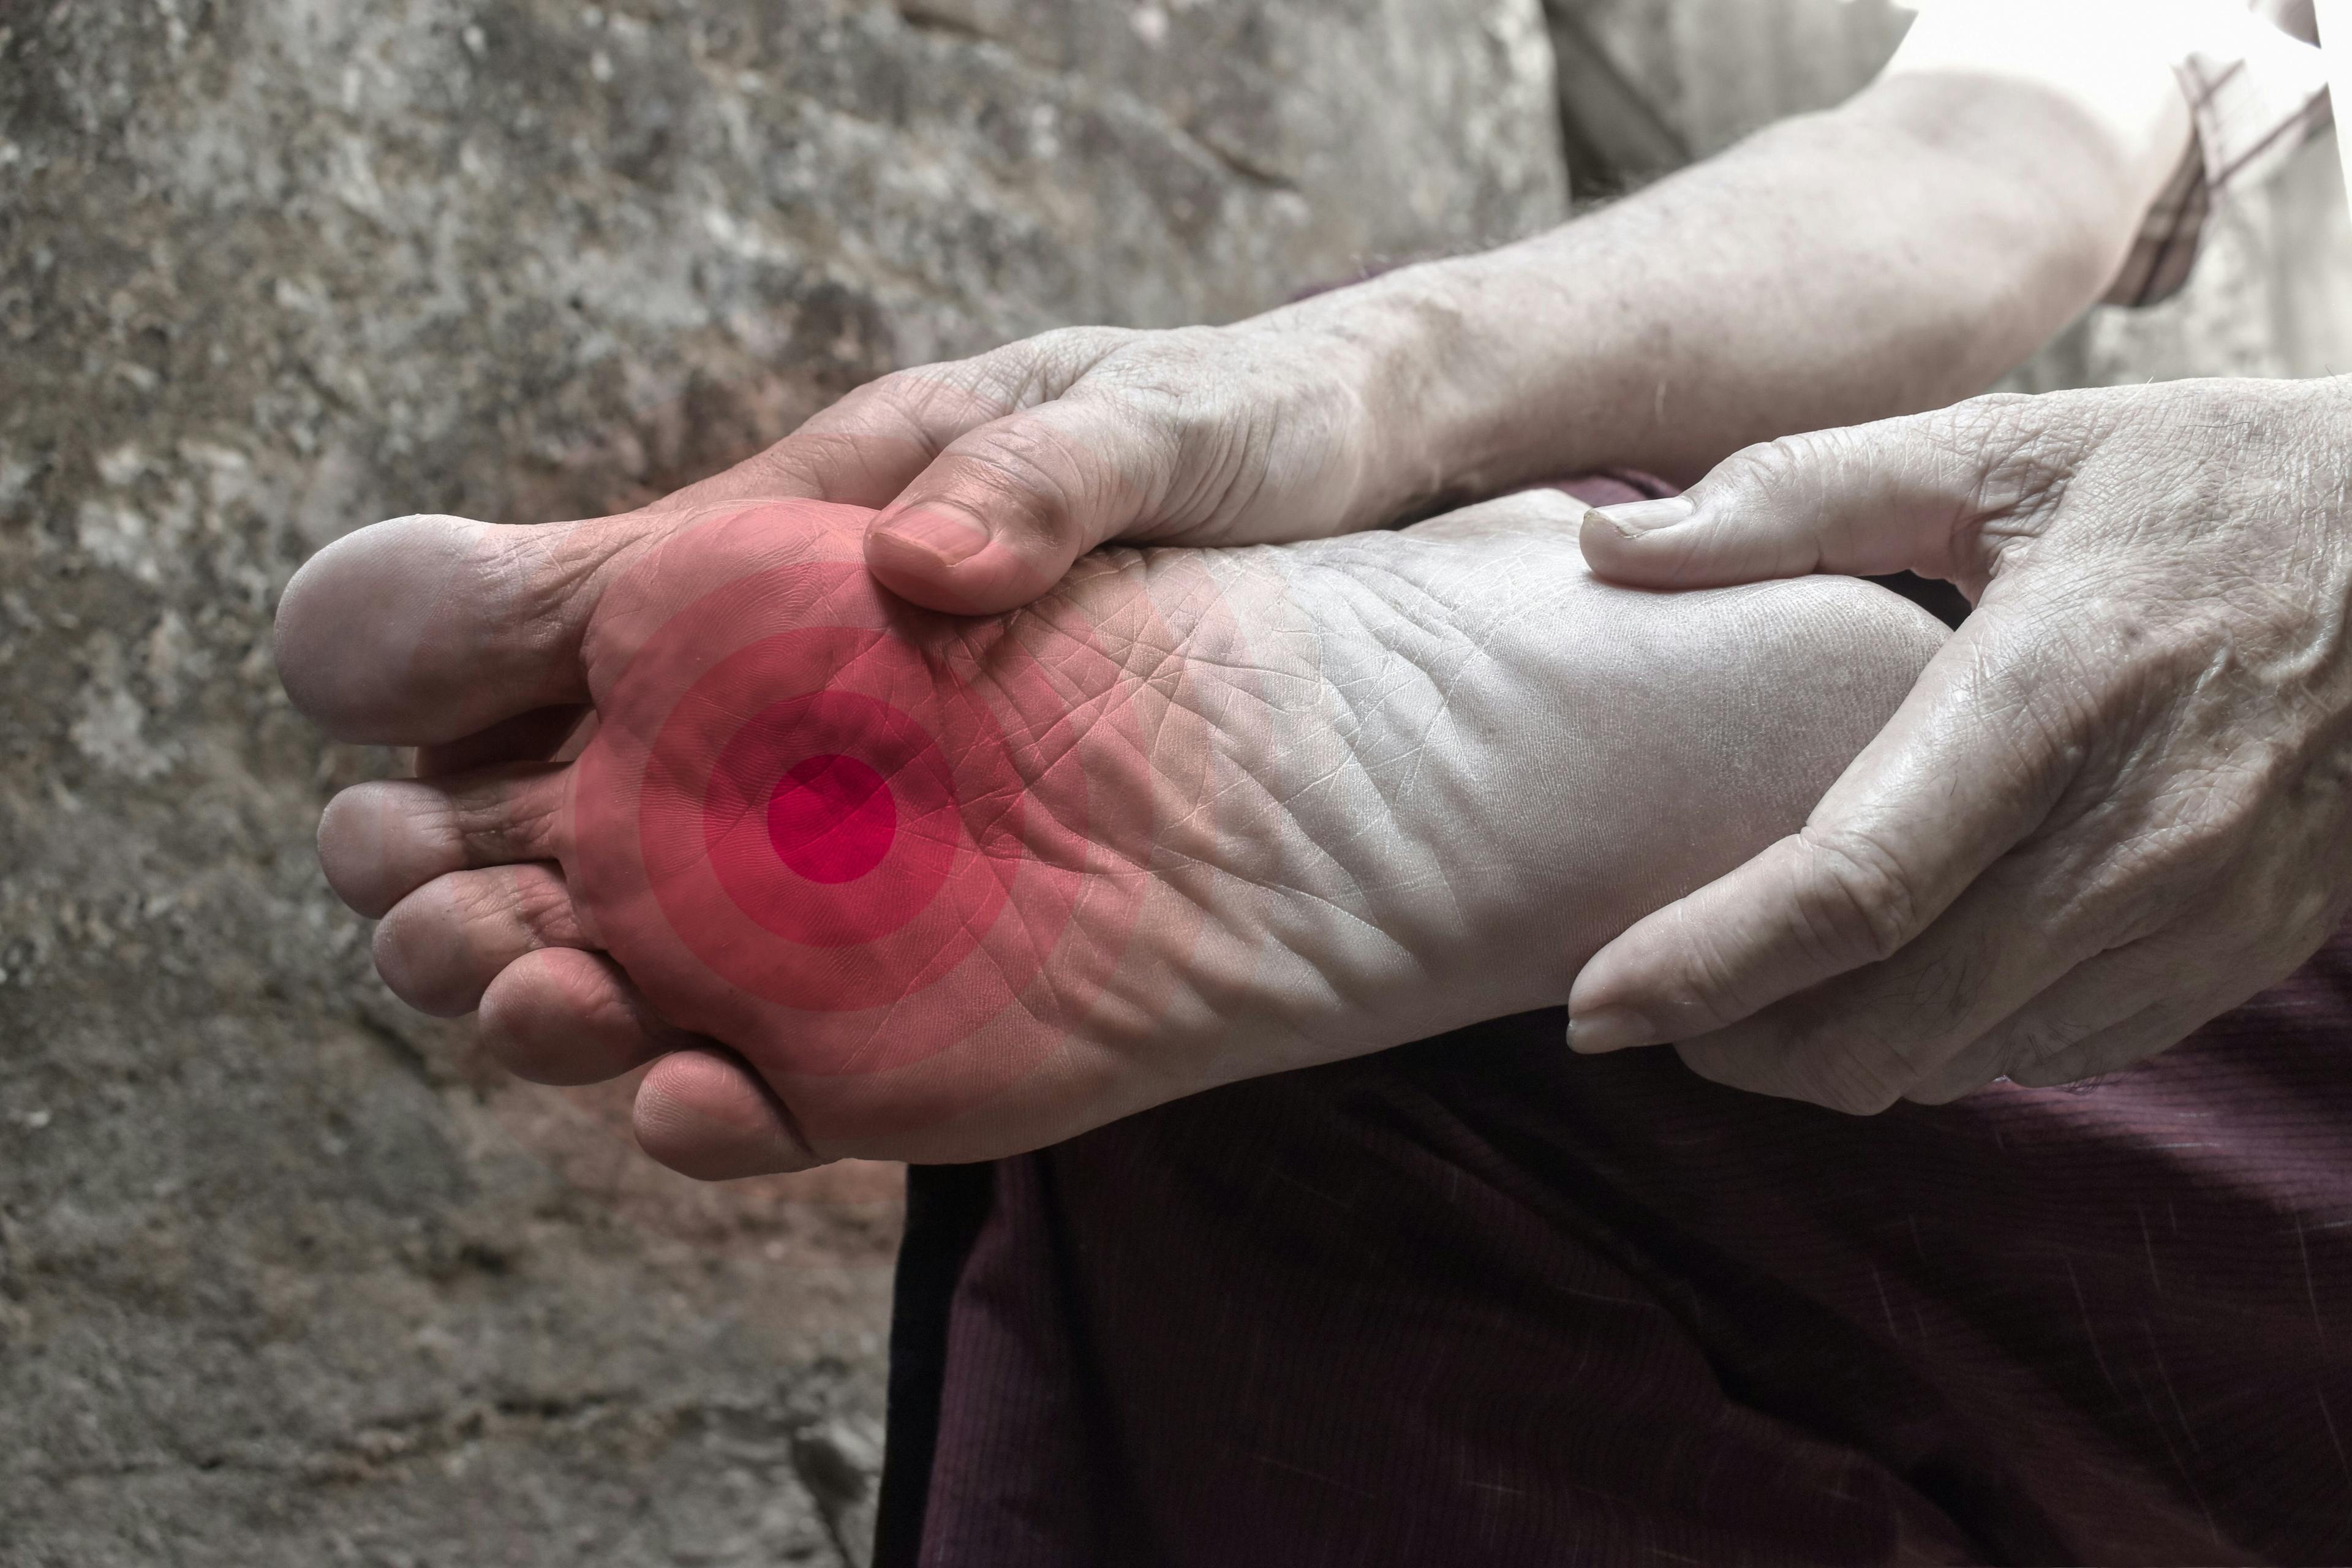 Tingling and burning sensation in foot of Asian man. Foot pain. Sensory neuropathy problems. Foot nerves problems. Plantar fasciitis. | Image credit: © ZayNyi - © stock.adobe.com